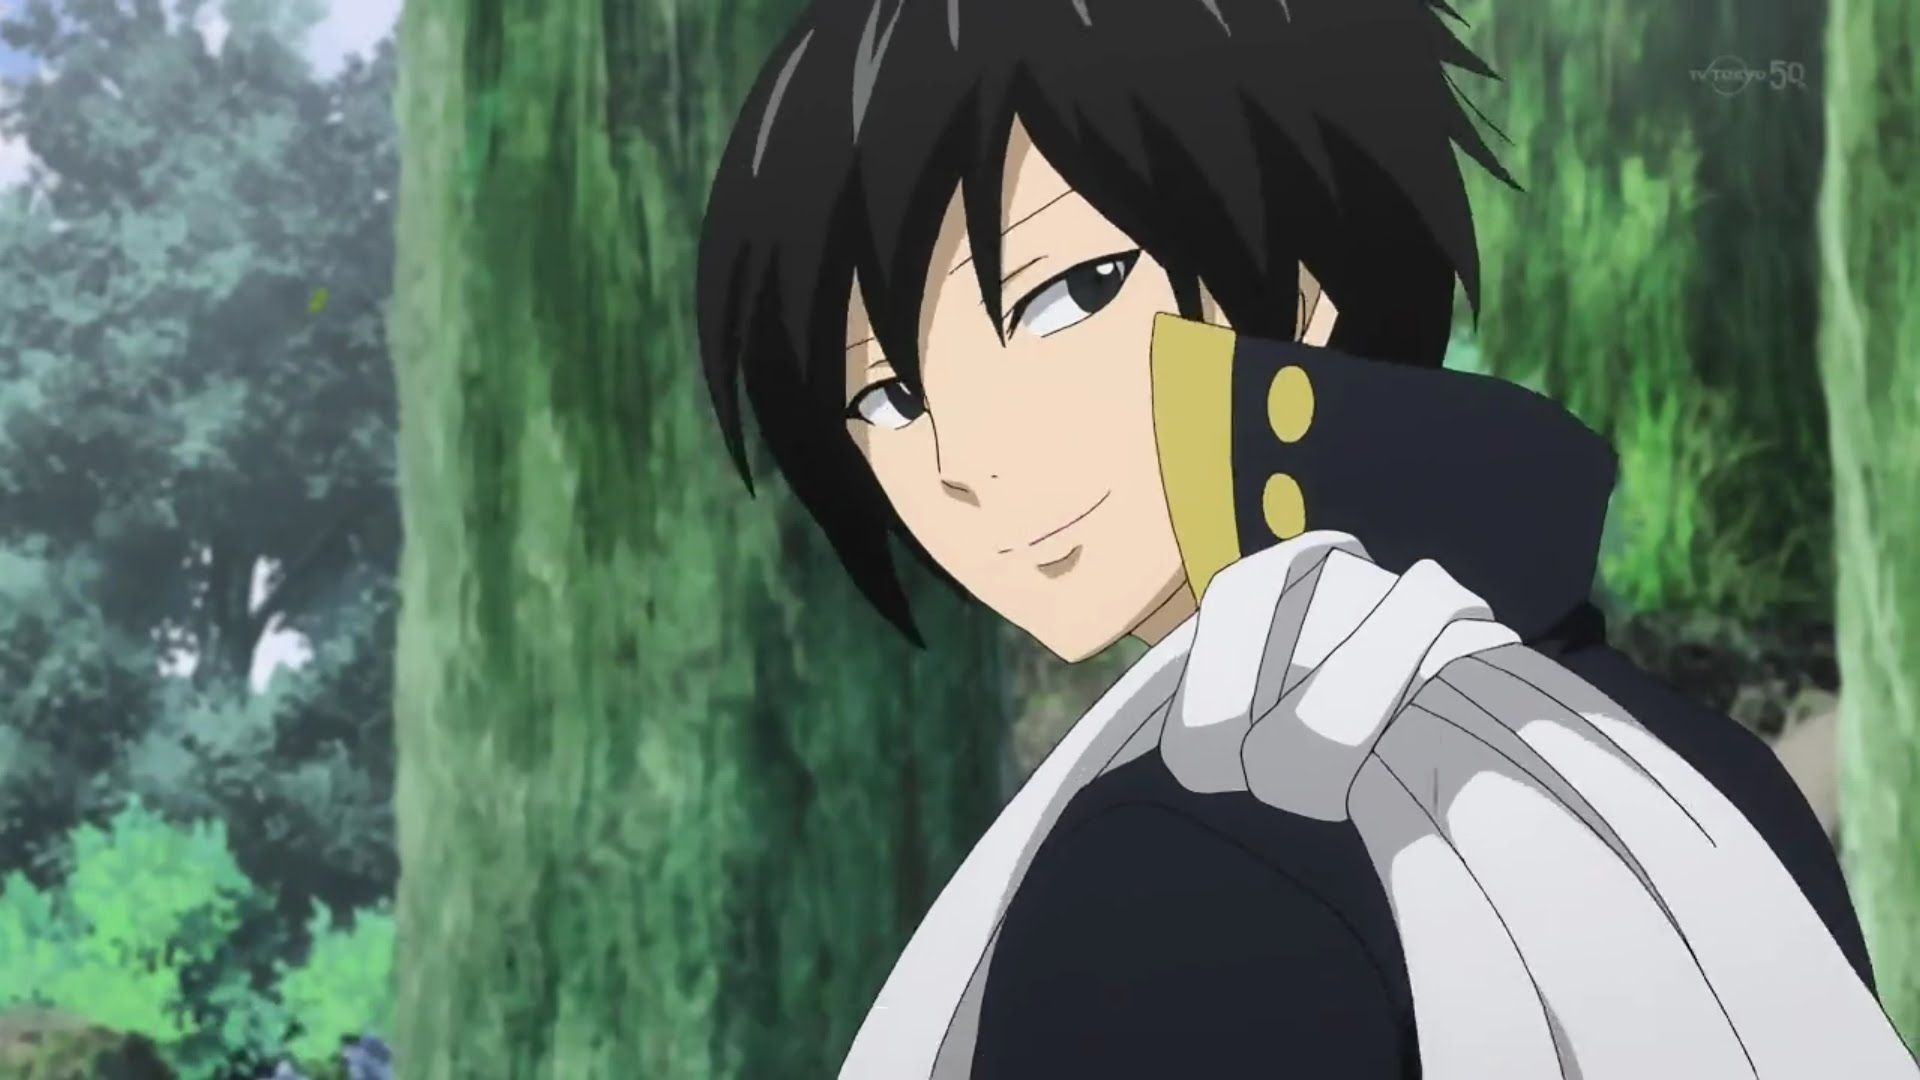 Fairy Tail Zeref S 10 Best Moves Ranked According To Strength